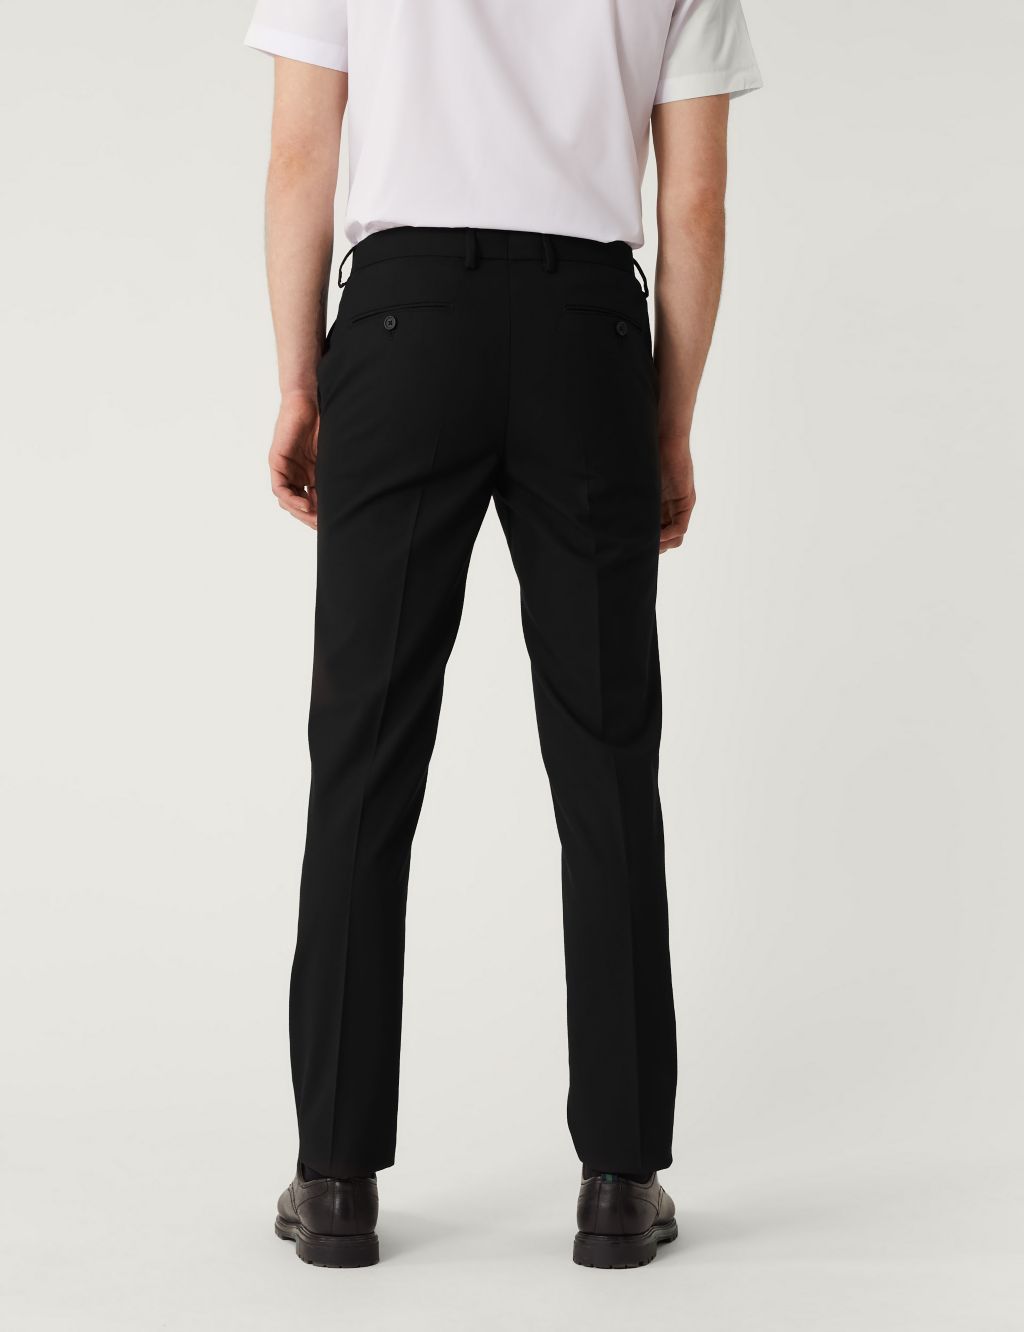 Tailored Fit Flat Front Stretch Trousers image 5